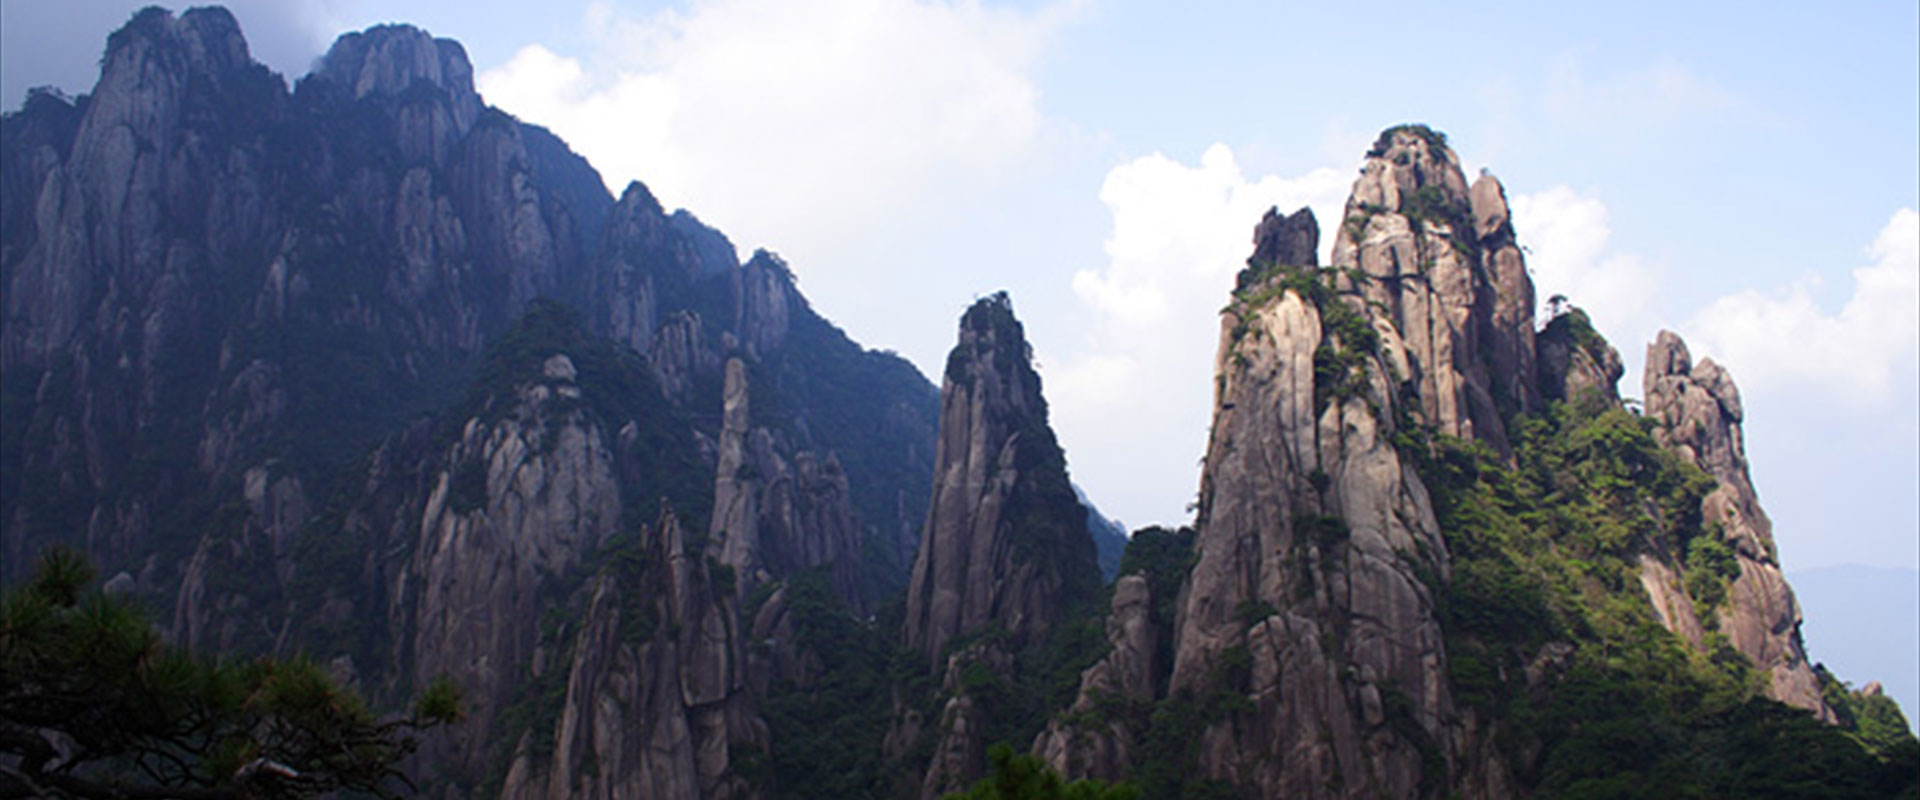 Sanqing Mountain Holiday Travel | Expats Holidays